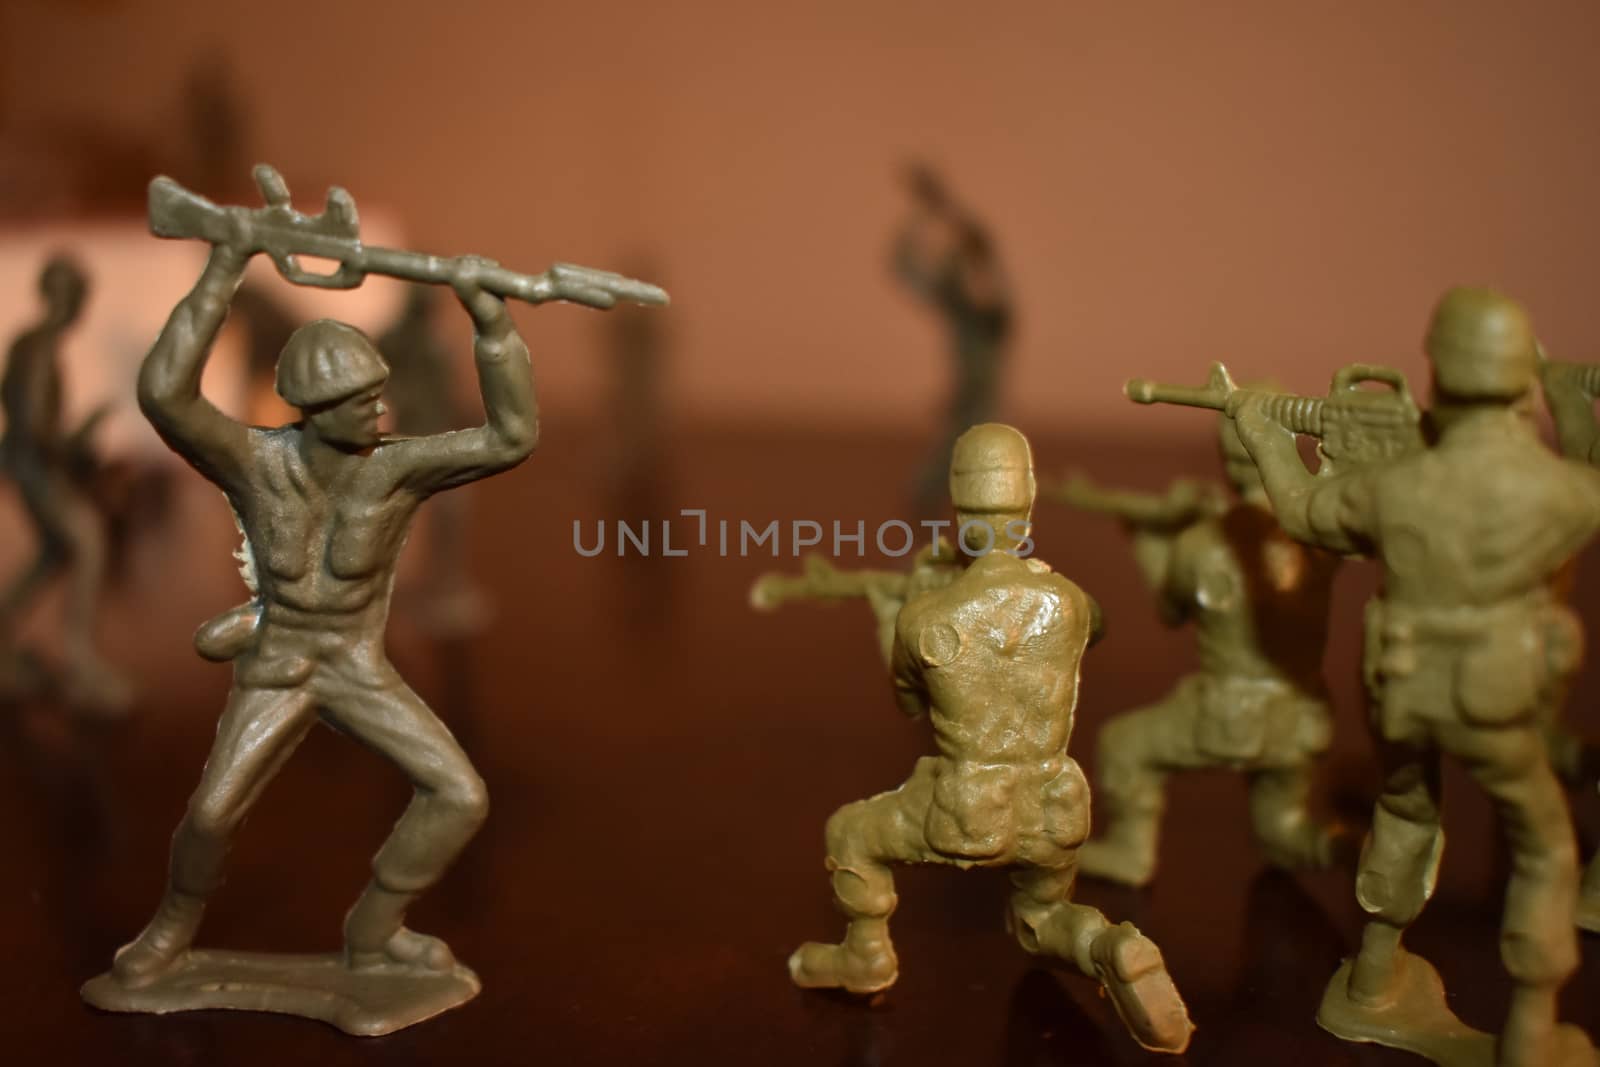 A Toy Soldier Charging a Group of Other Toy Soldiers on a Wooden Surface